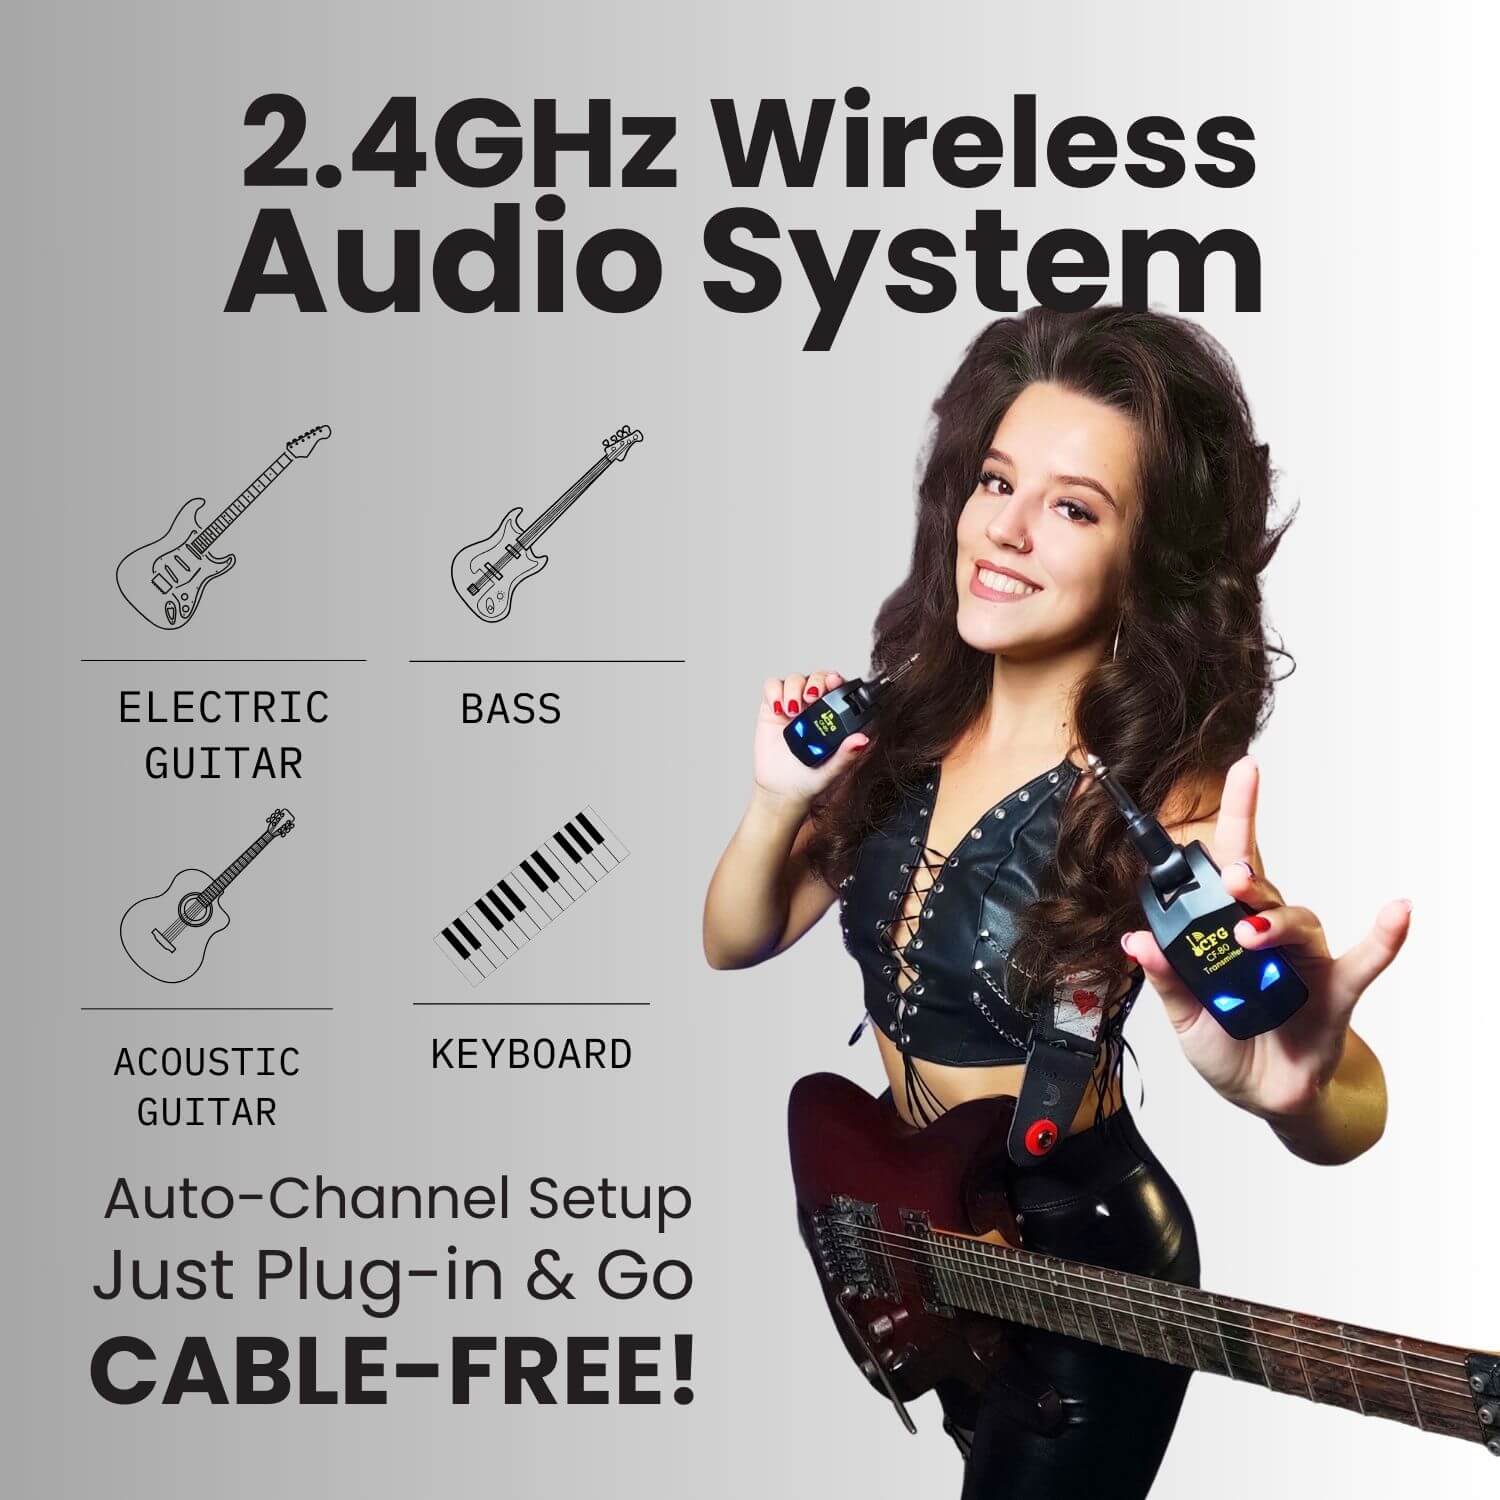 A woman with long, curly hair is smiling and holding two CFG 2.4GHz wireless audio system units, one in each hand. She's wearing a leather-look sleeveless top and playing a dark red electric bass guitar. The background is grey with illustrations of an electric guitar, acoustic guitar, bass, and keyboard, accompanied by text highlighting the system's compatibility with these instruments. Features such as 'Auto-Channel Setup' and 'Just Plug-in & Go' are emphasized along with the promise of a 'CABLE-FREE' experience.